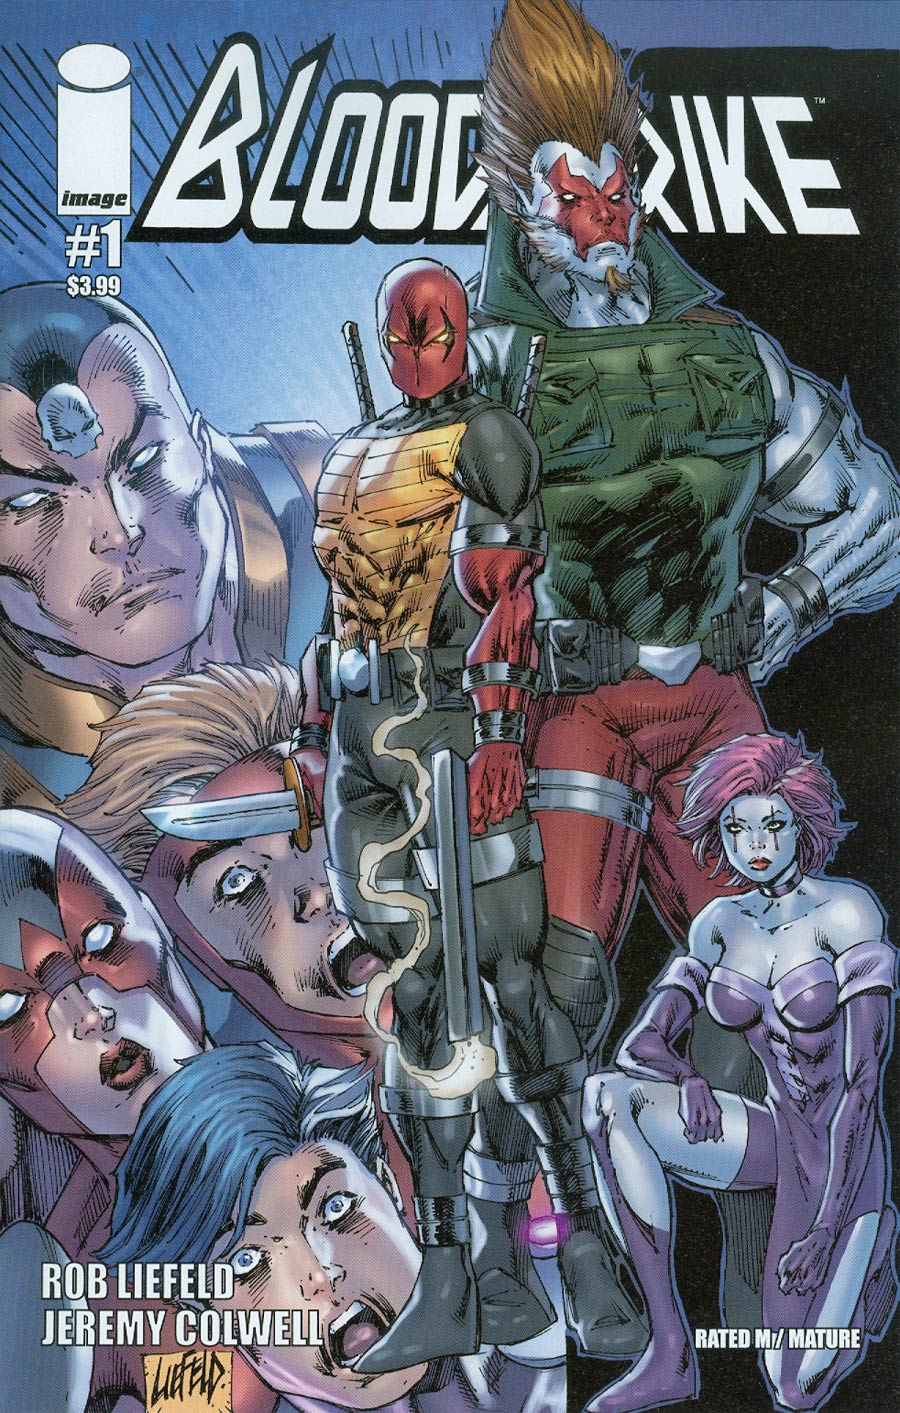 Bloodstrike Vol 2 #1 Cover A Regular Rob Liefeld Cover